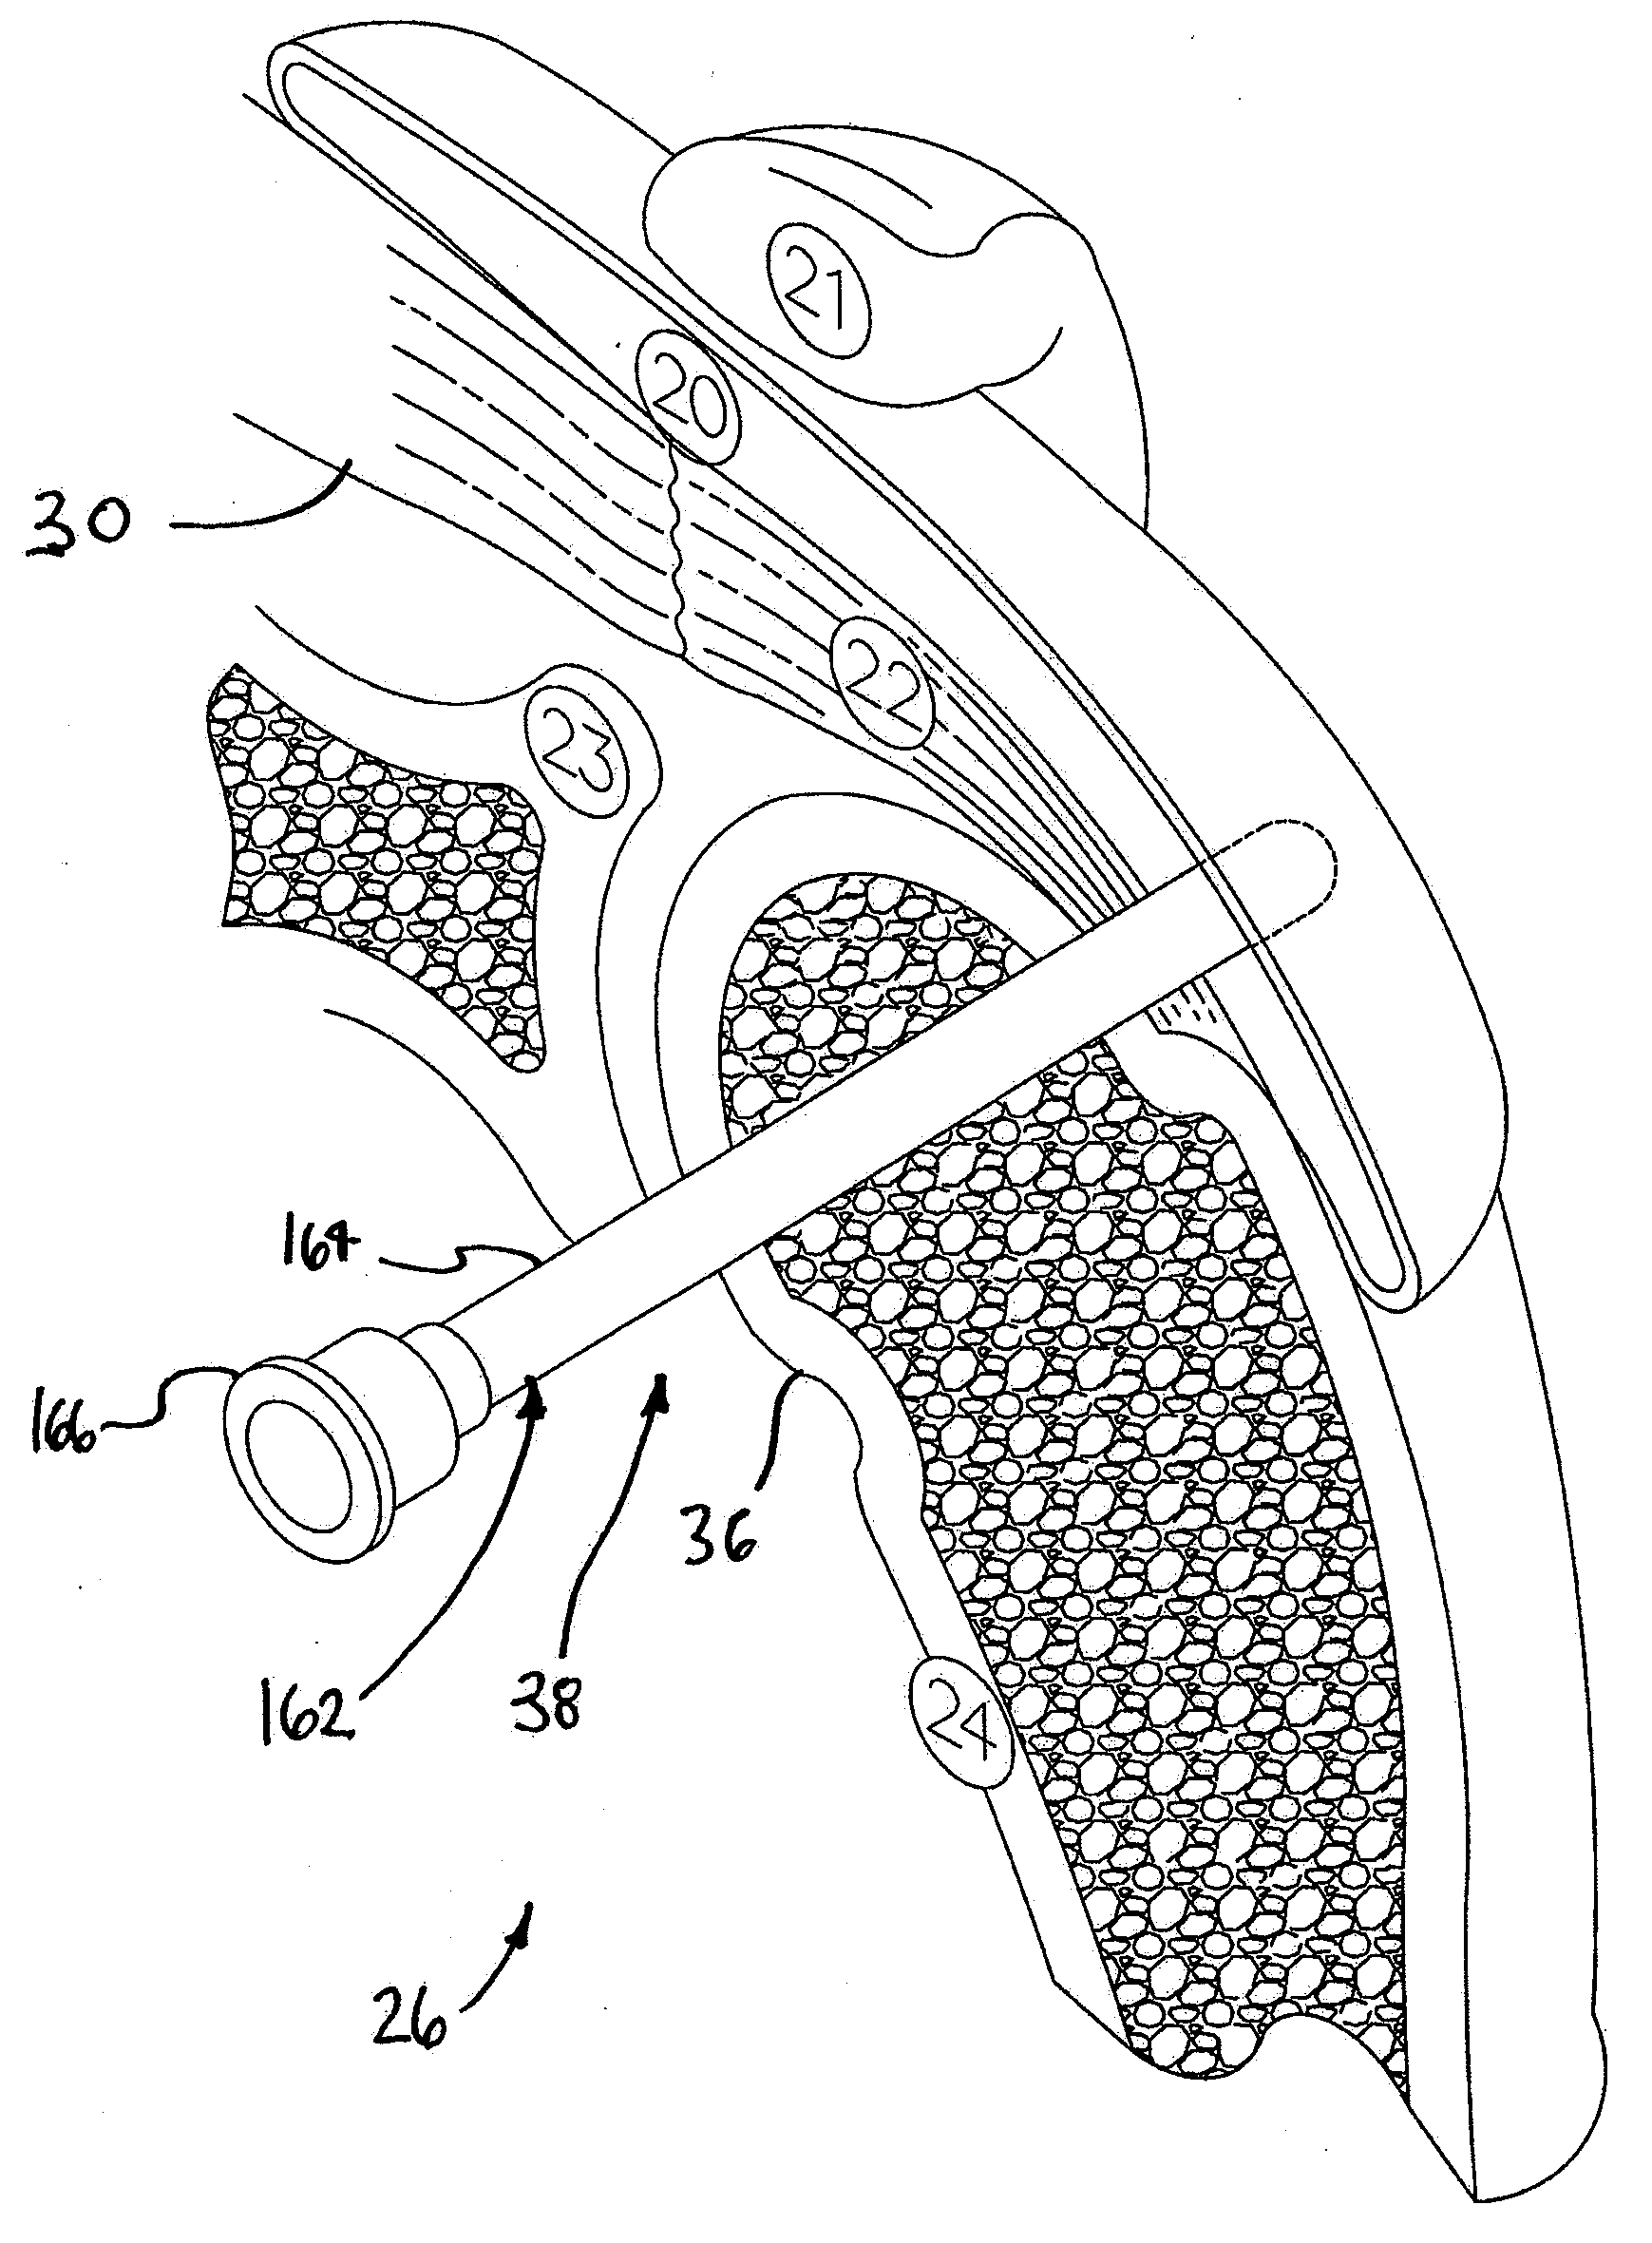 Implantable Tendon Protection Systems and Related Kits and Methods